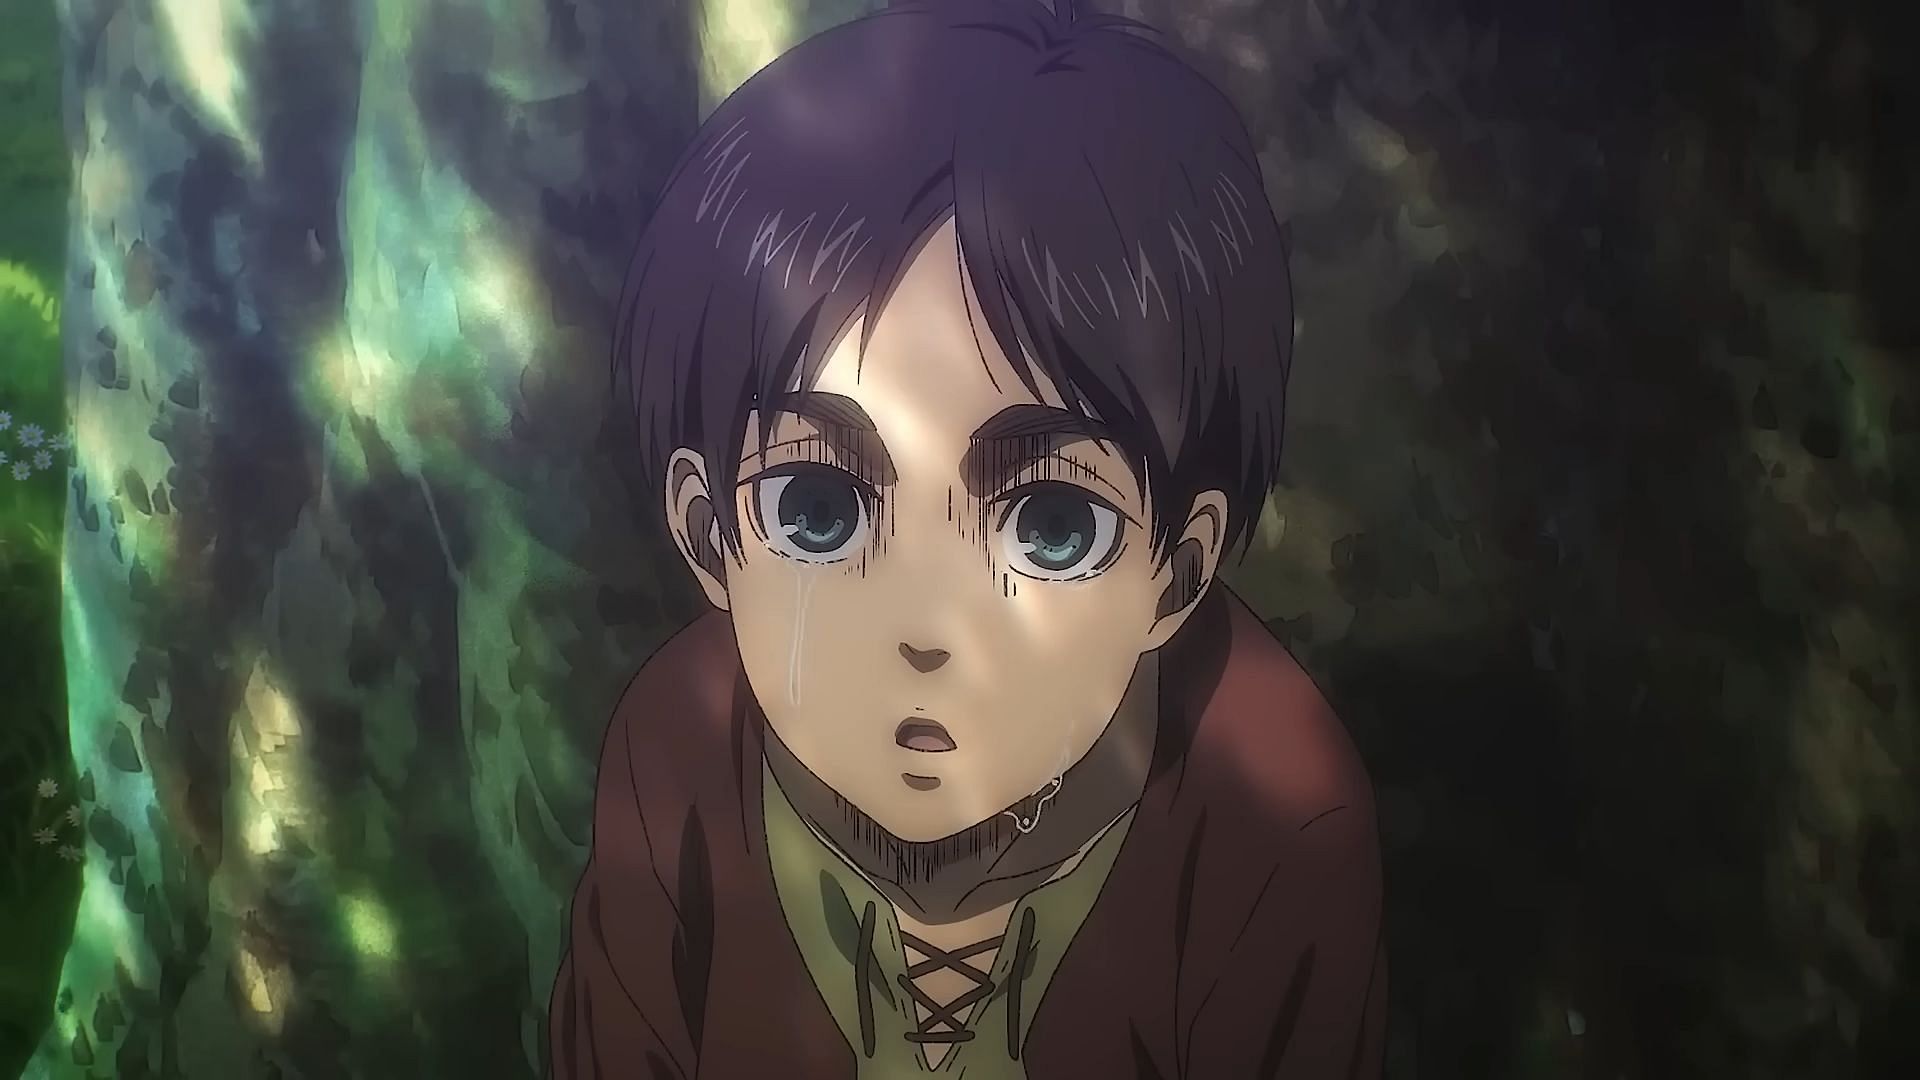 Attack on Titan Final Season Part 3 Premiere to Be Hour-Long Special